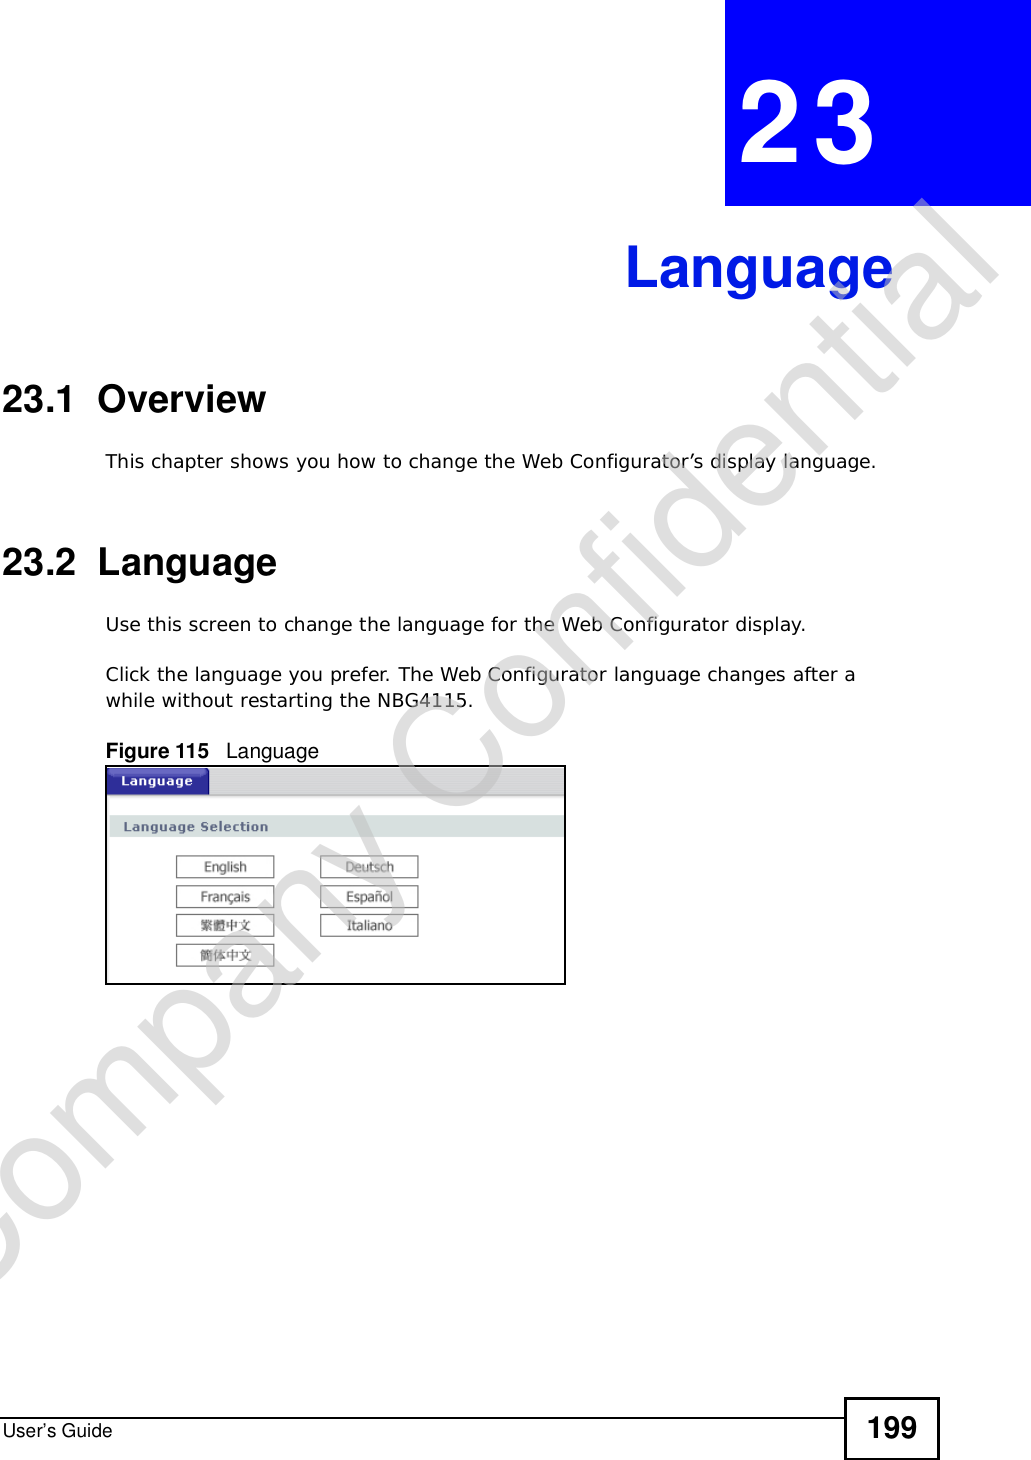 User’s Guide 199CHAPTER 23Language23.1  OverviewThis chapter shows you how to change the Web Configurator’s display language.23.2  LanguageUse this screen to change the language for the Web Configurator display.Click the language you prefer. The Web Configurator language changes after a while without restarting the NBG4115.Figure 115   LanguageCompany Confidential